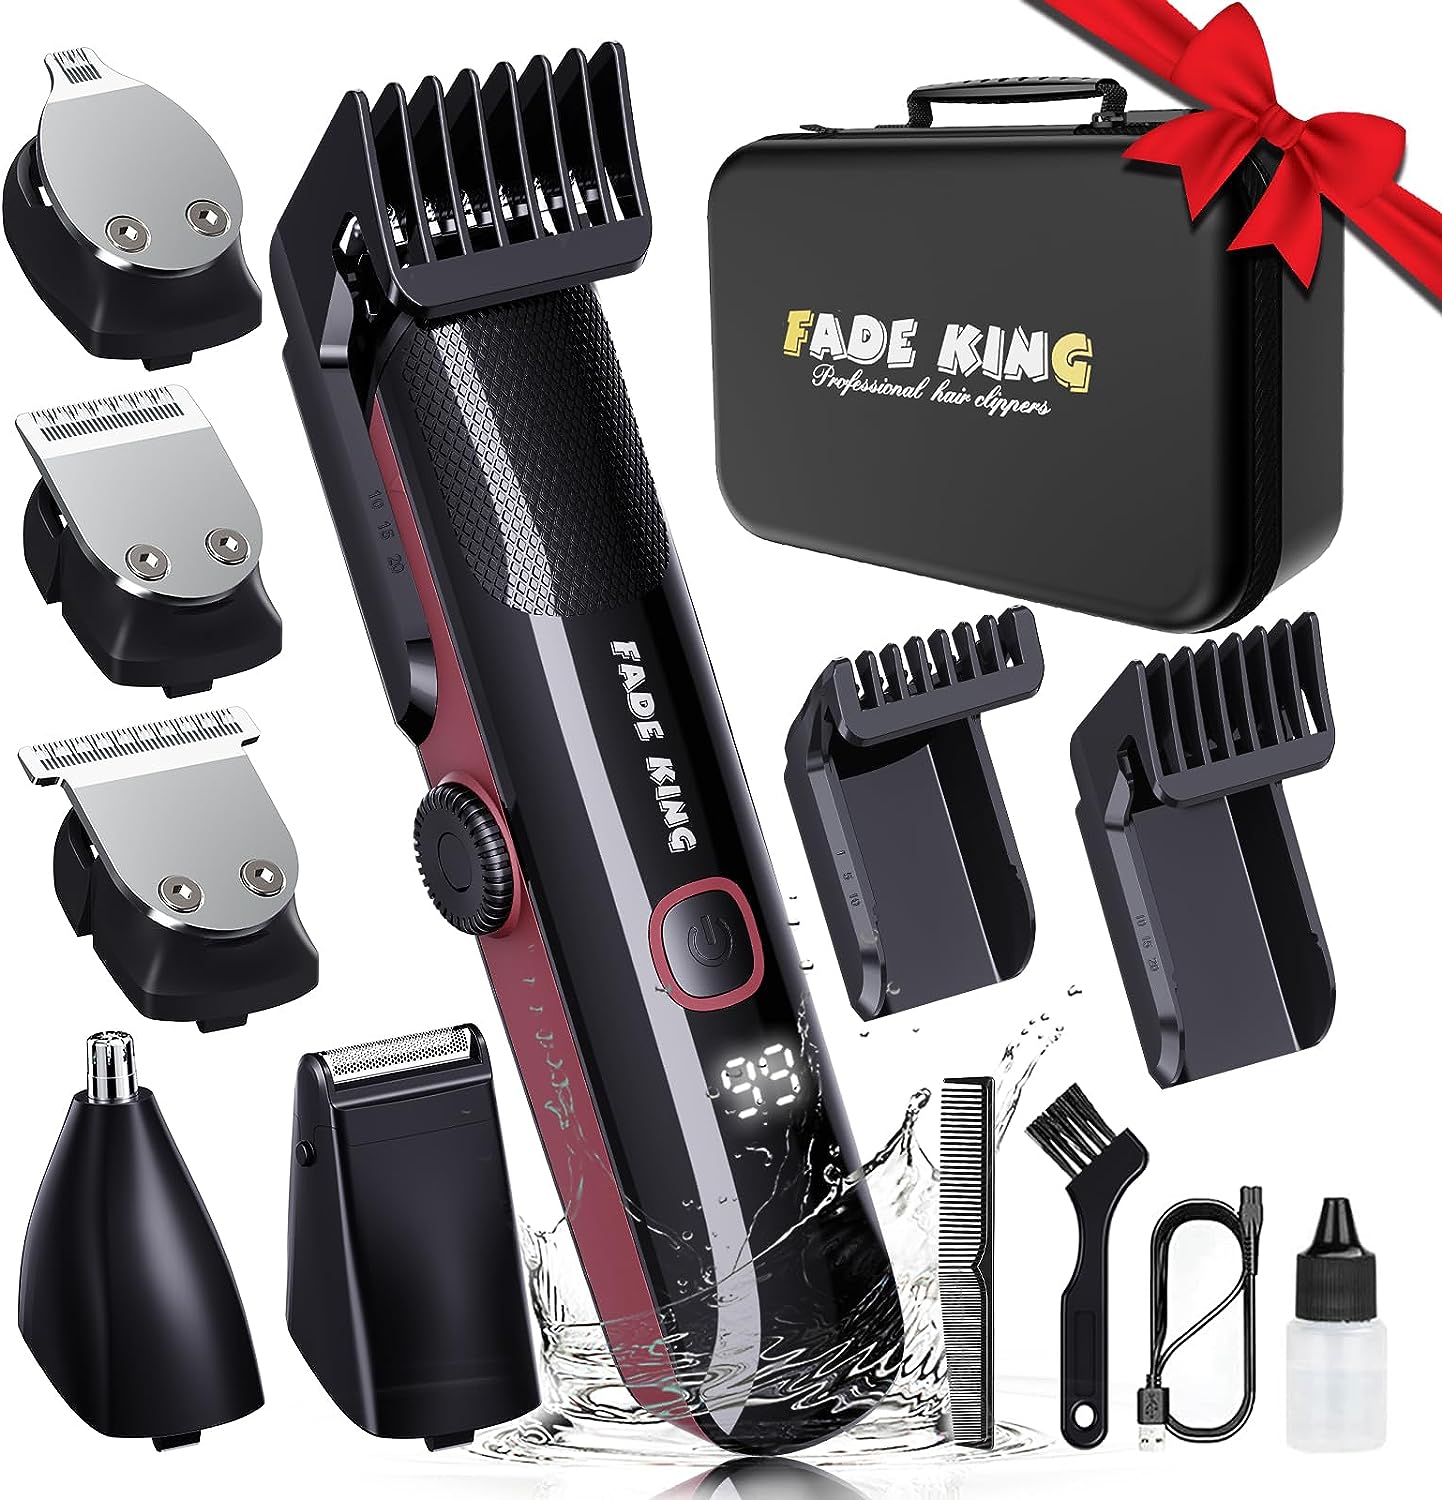 FADEKING® Beard Trimmer for Men -All-In-One IPX7 Waterproof Shaving Kit with Cordless Hair Clippers, Nose Hair Trimmer, Razors for Men, Mustache Nose Body Facial Hair Shaver, Gifts for Men